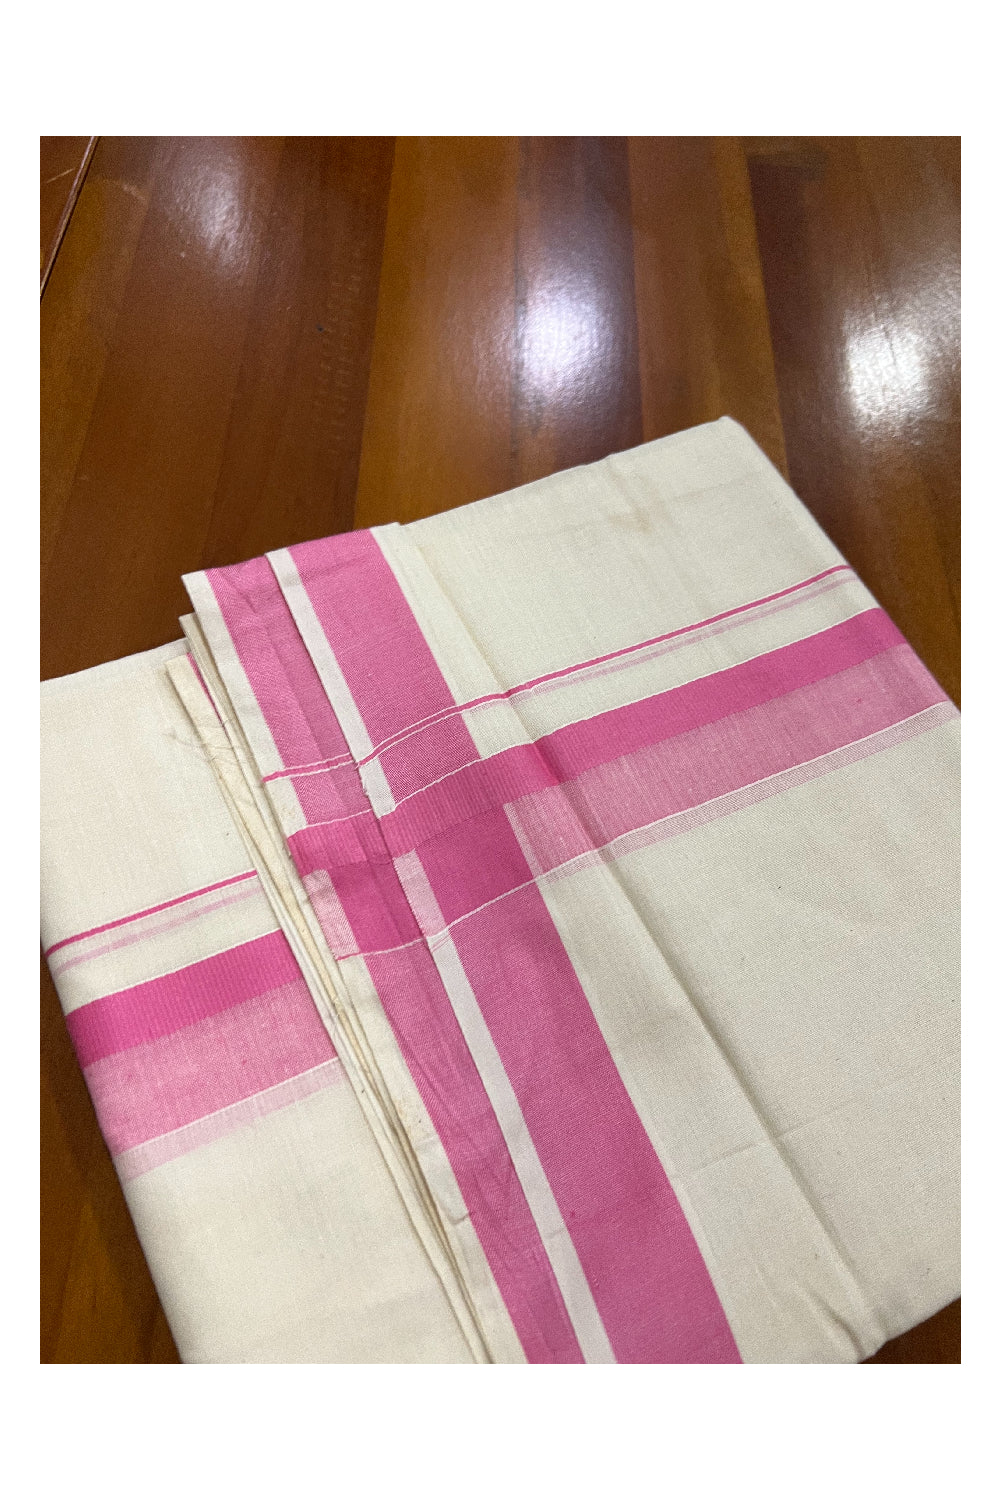 Off White Pure Cotton Double Mundu with Pink Shaded Kara (South Indian Dhoti)